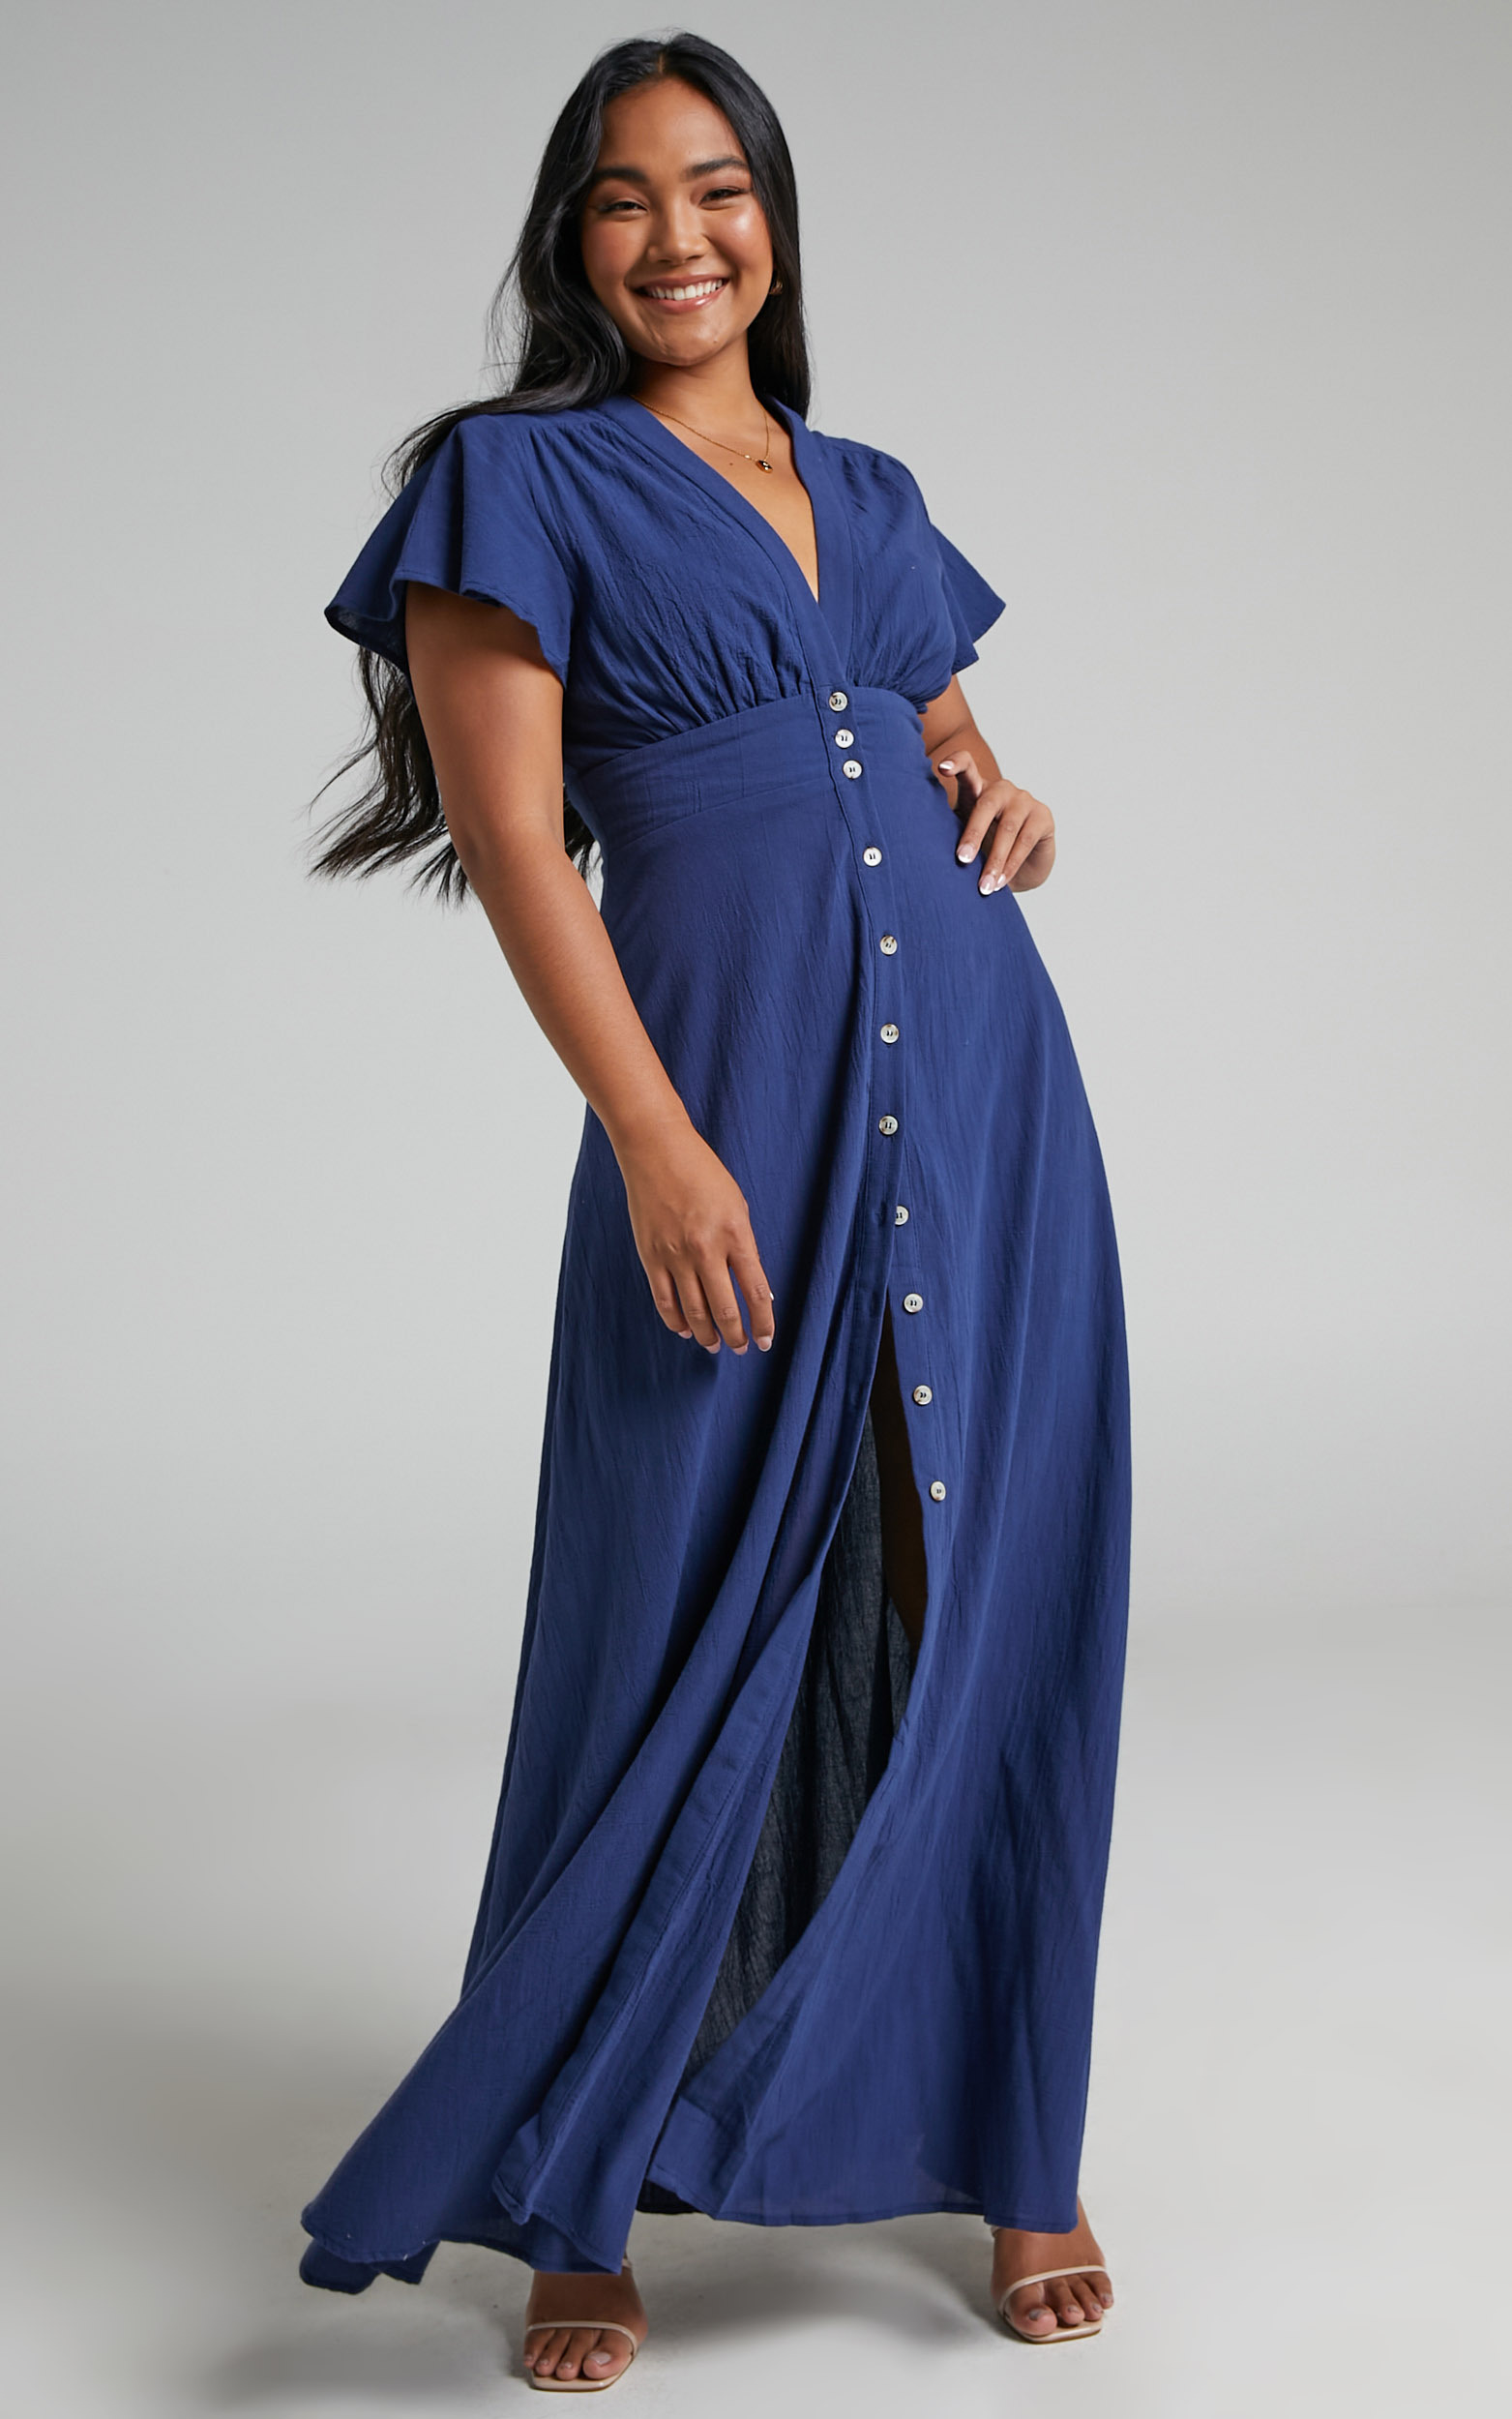 Elijah Empire Waist Button Down Maxi Dress in Navy - 06, NVY2, hi-res image number null